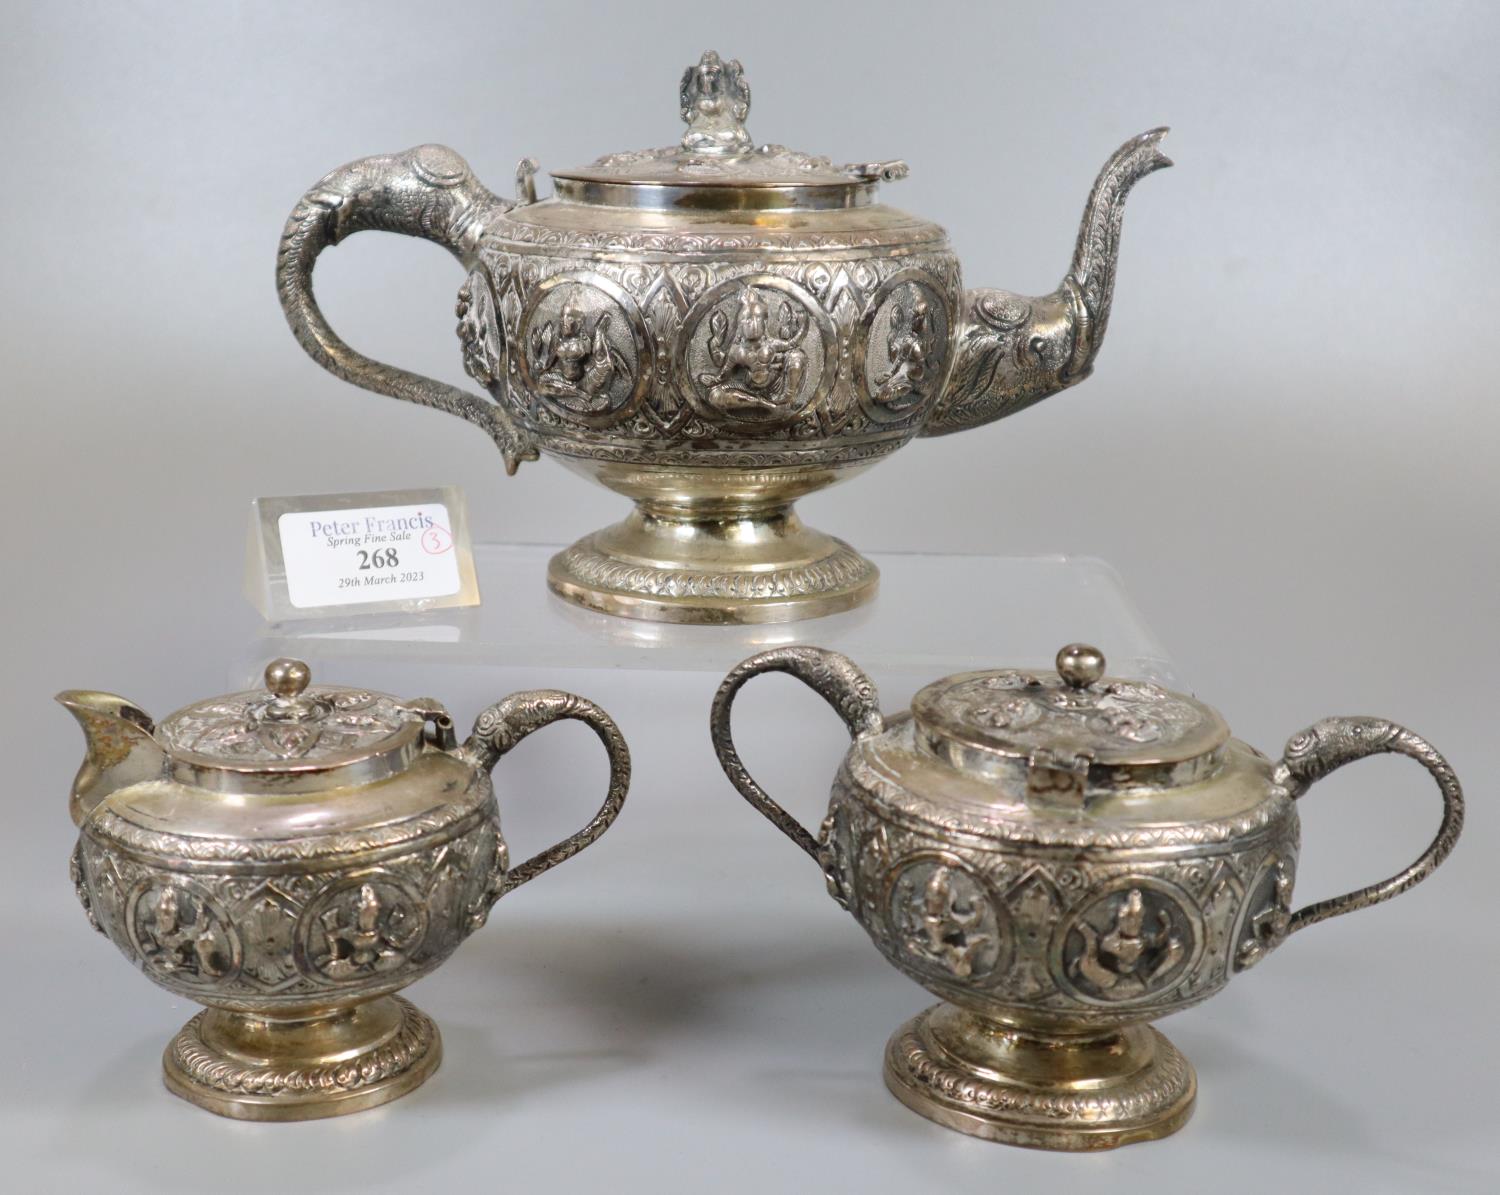 Indian white metal three piece teaset comprising: teapot, two handled lidded sucrier and a lidded